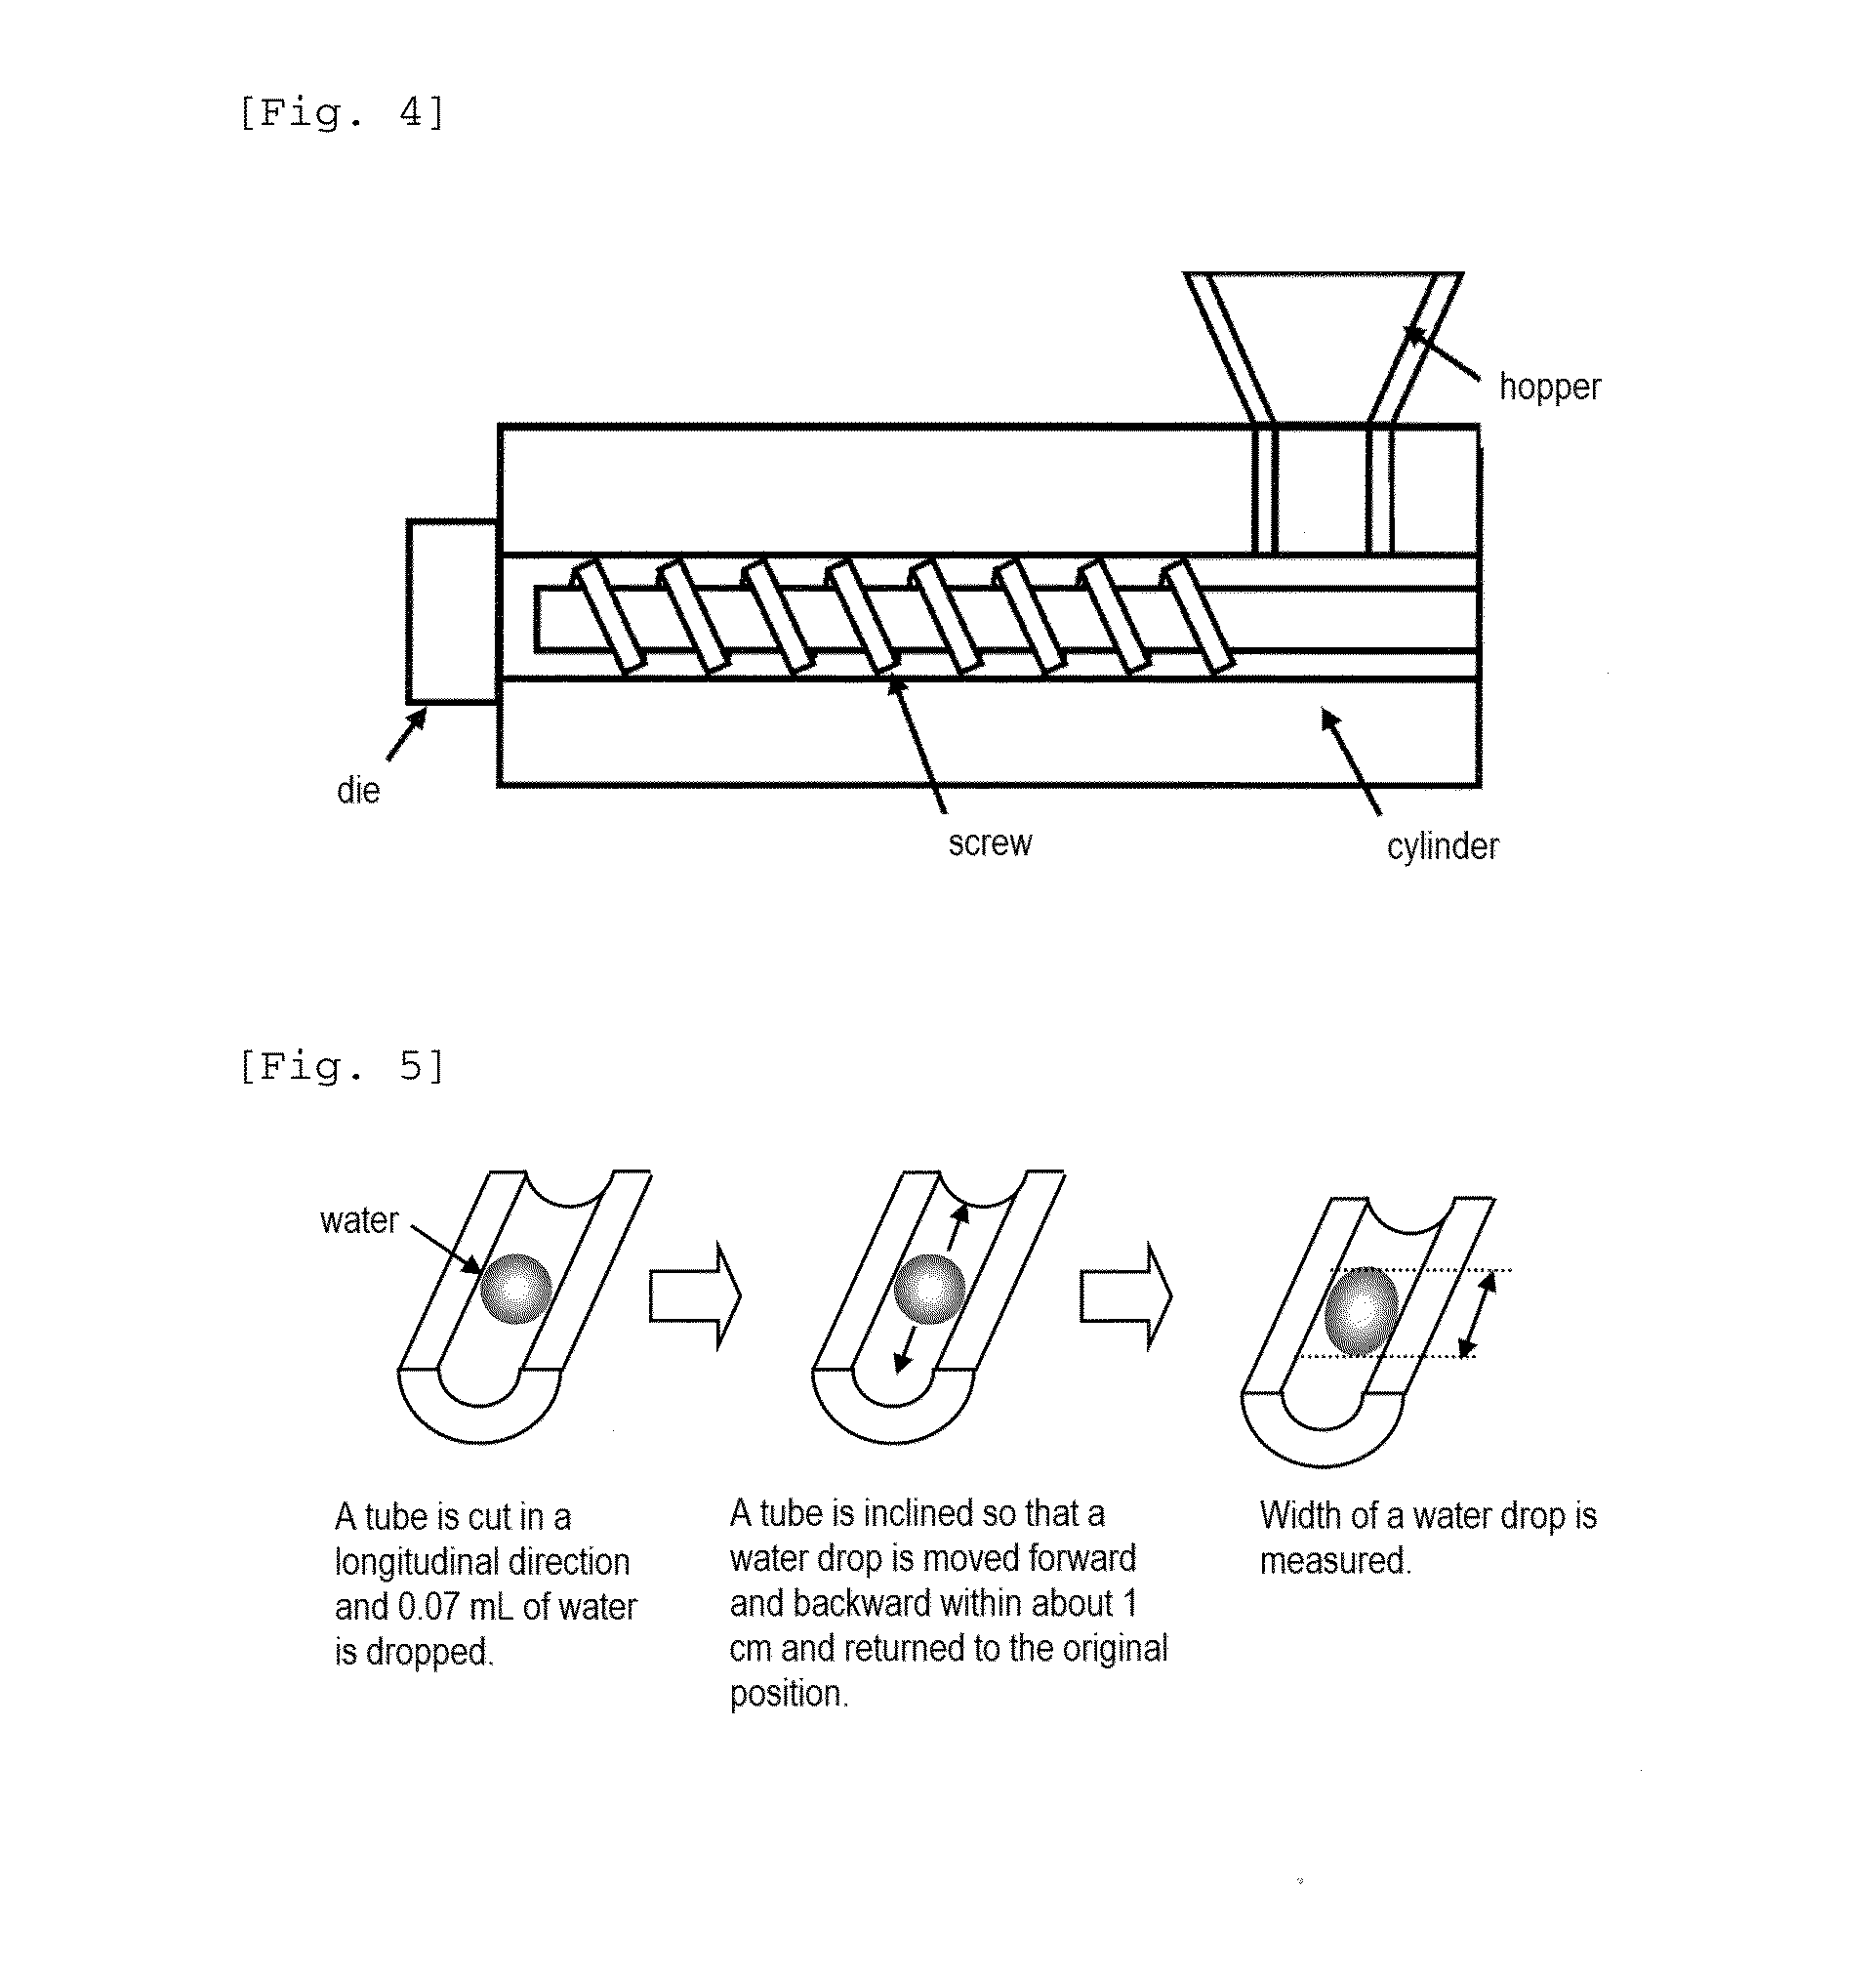 Pellet-shaped composition for medical use, and molded product